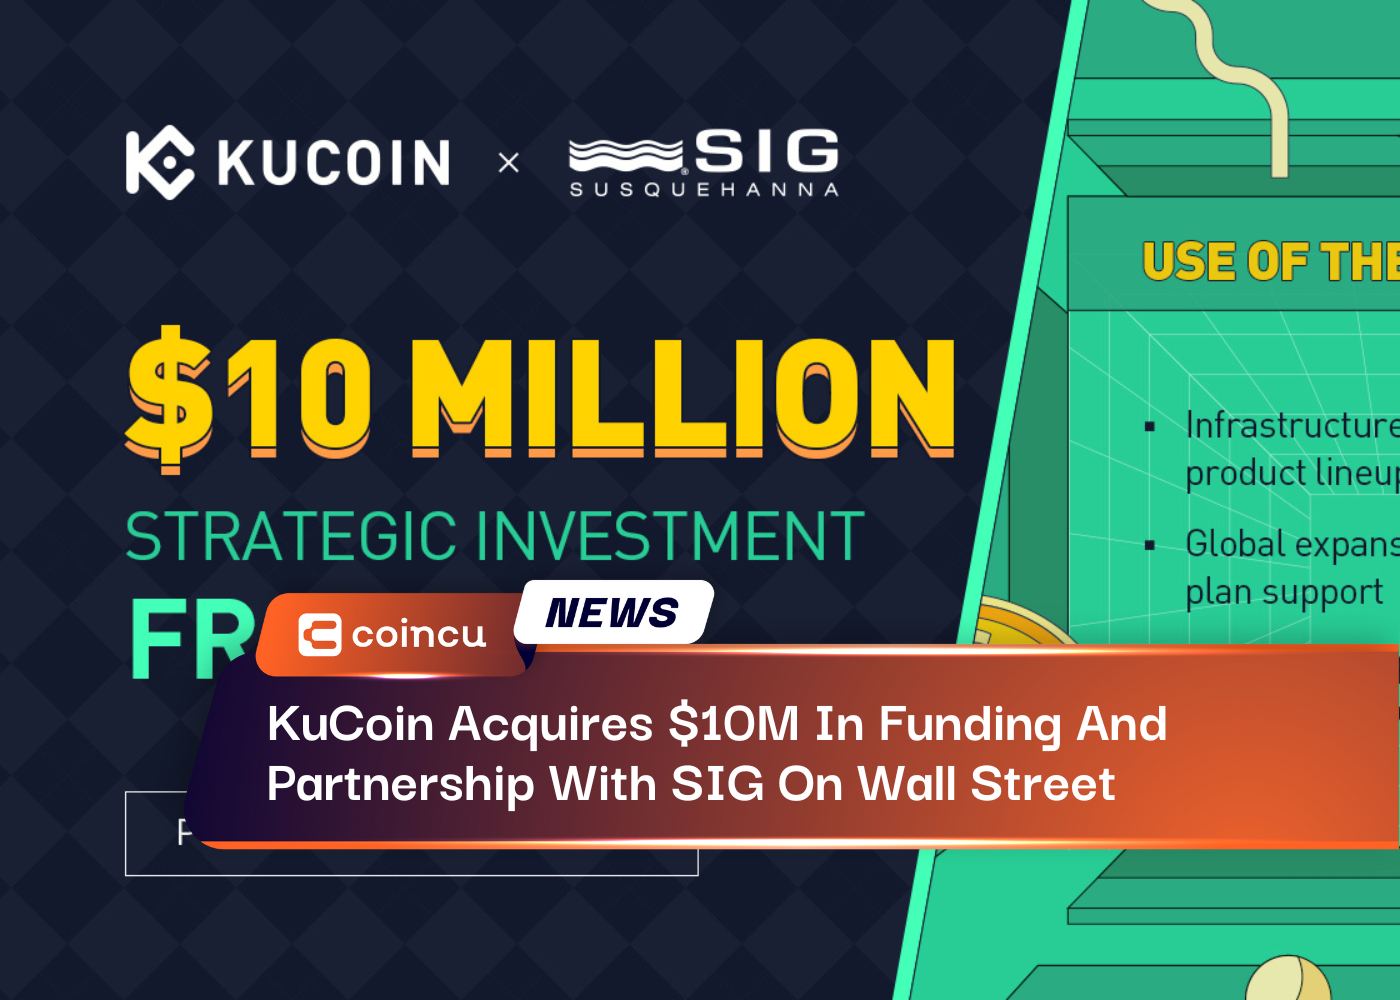 KuCoin Acquires 10M In Funding And